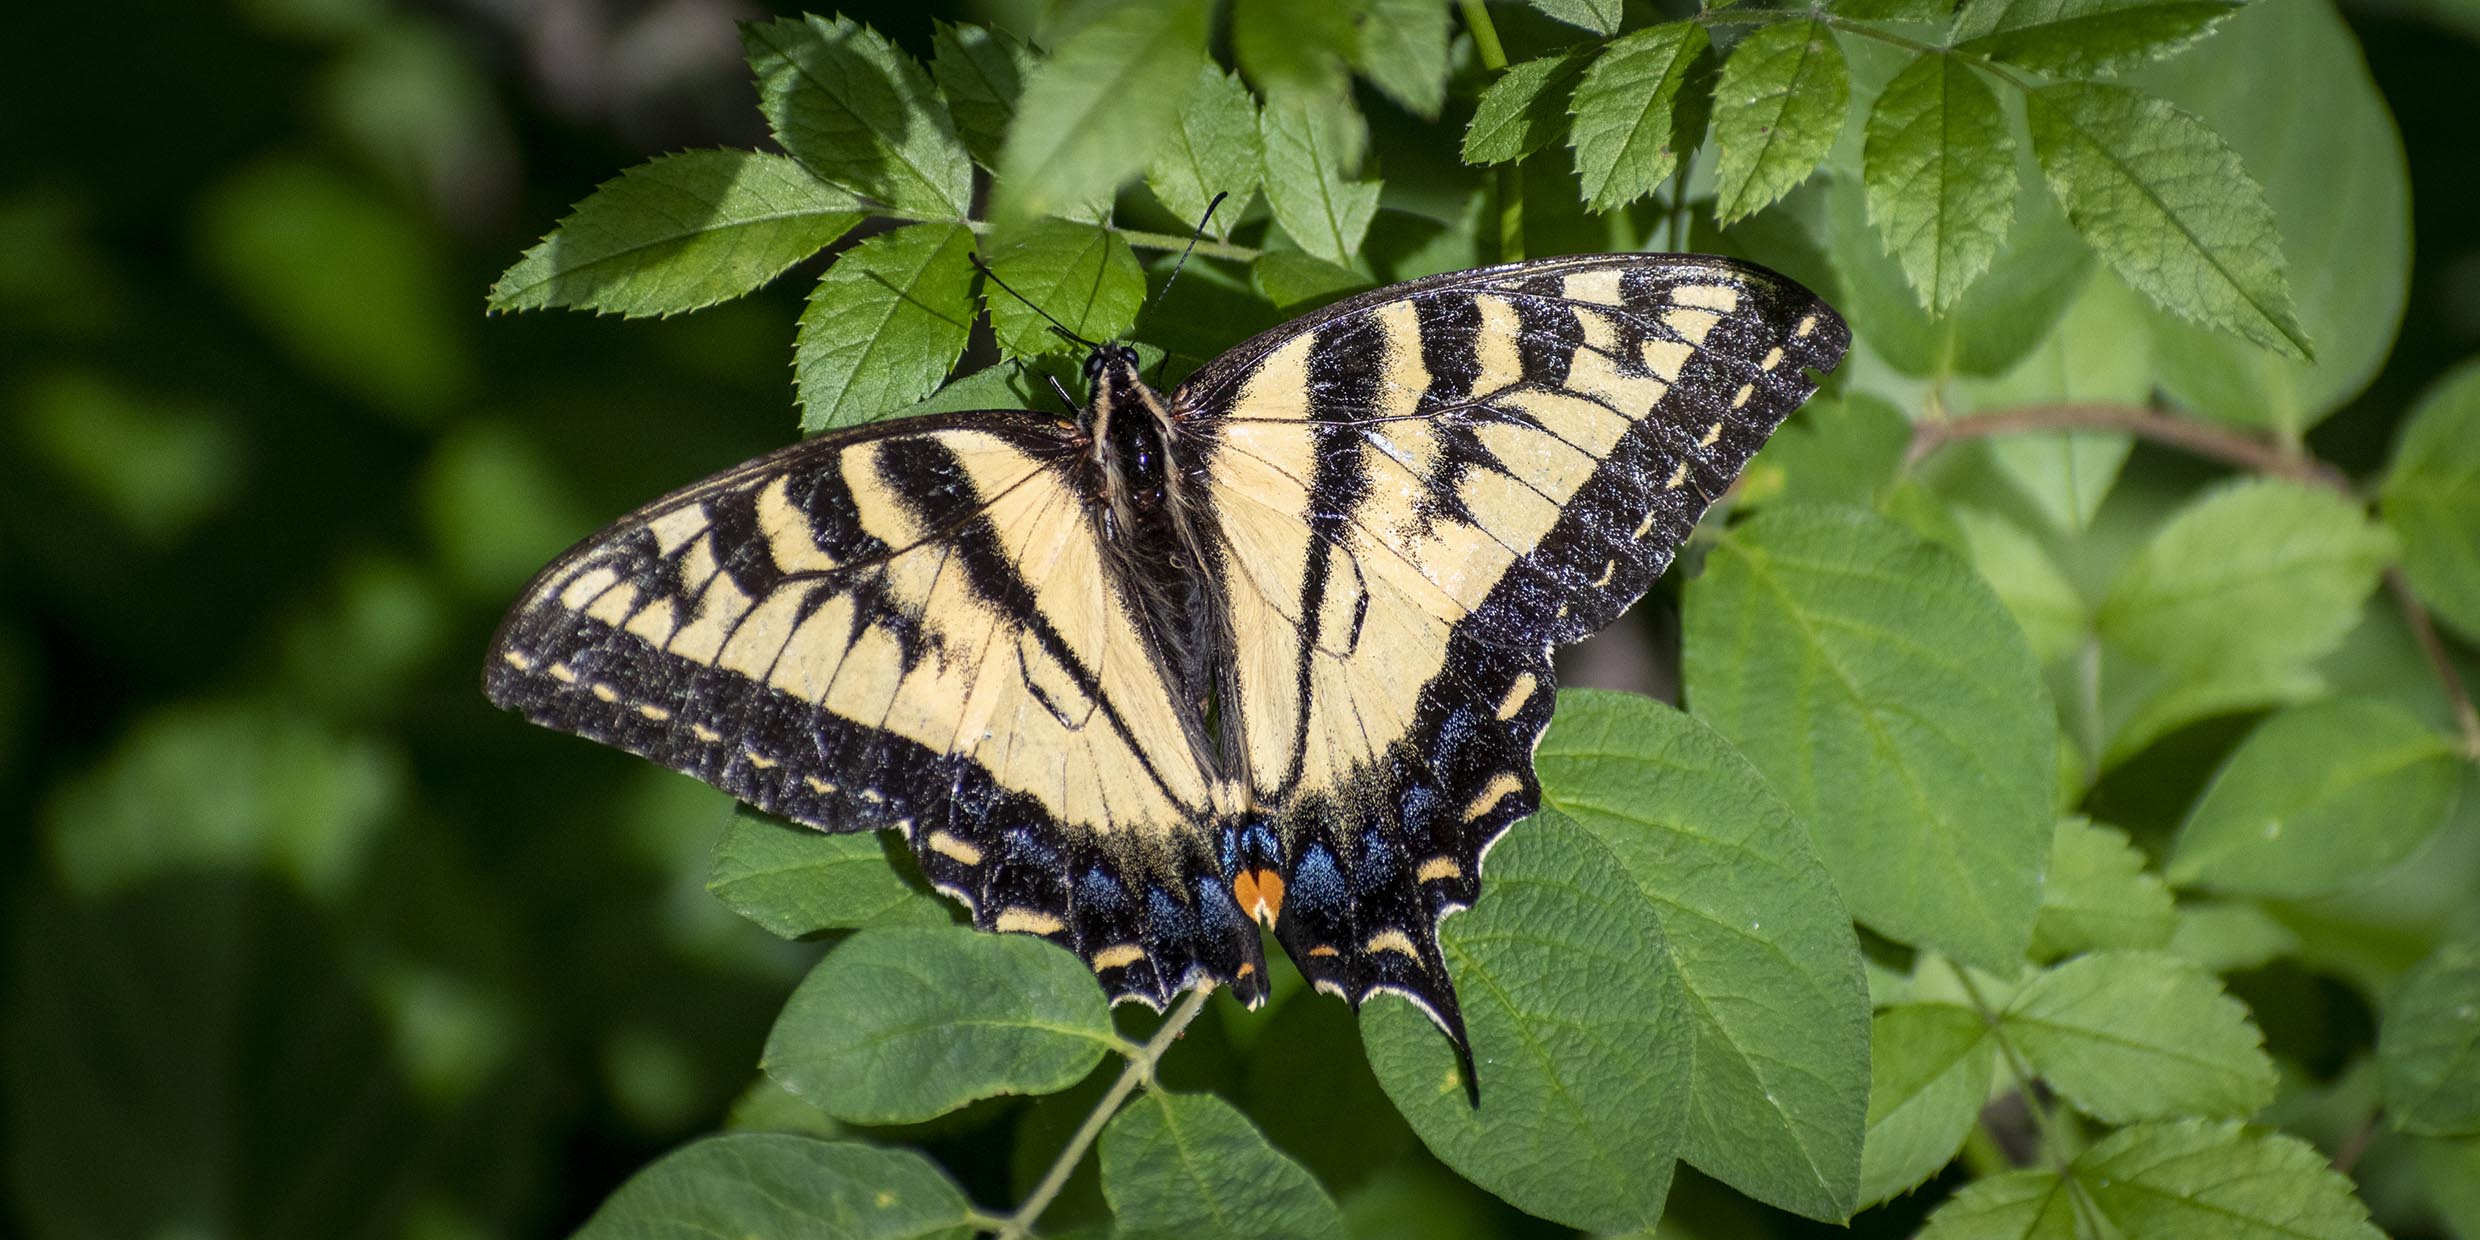 Image of yellow and black striped butterfly resting on leaf